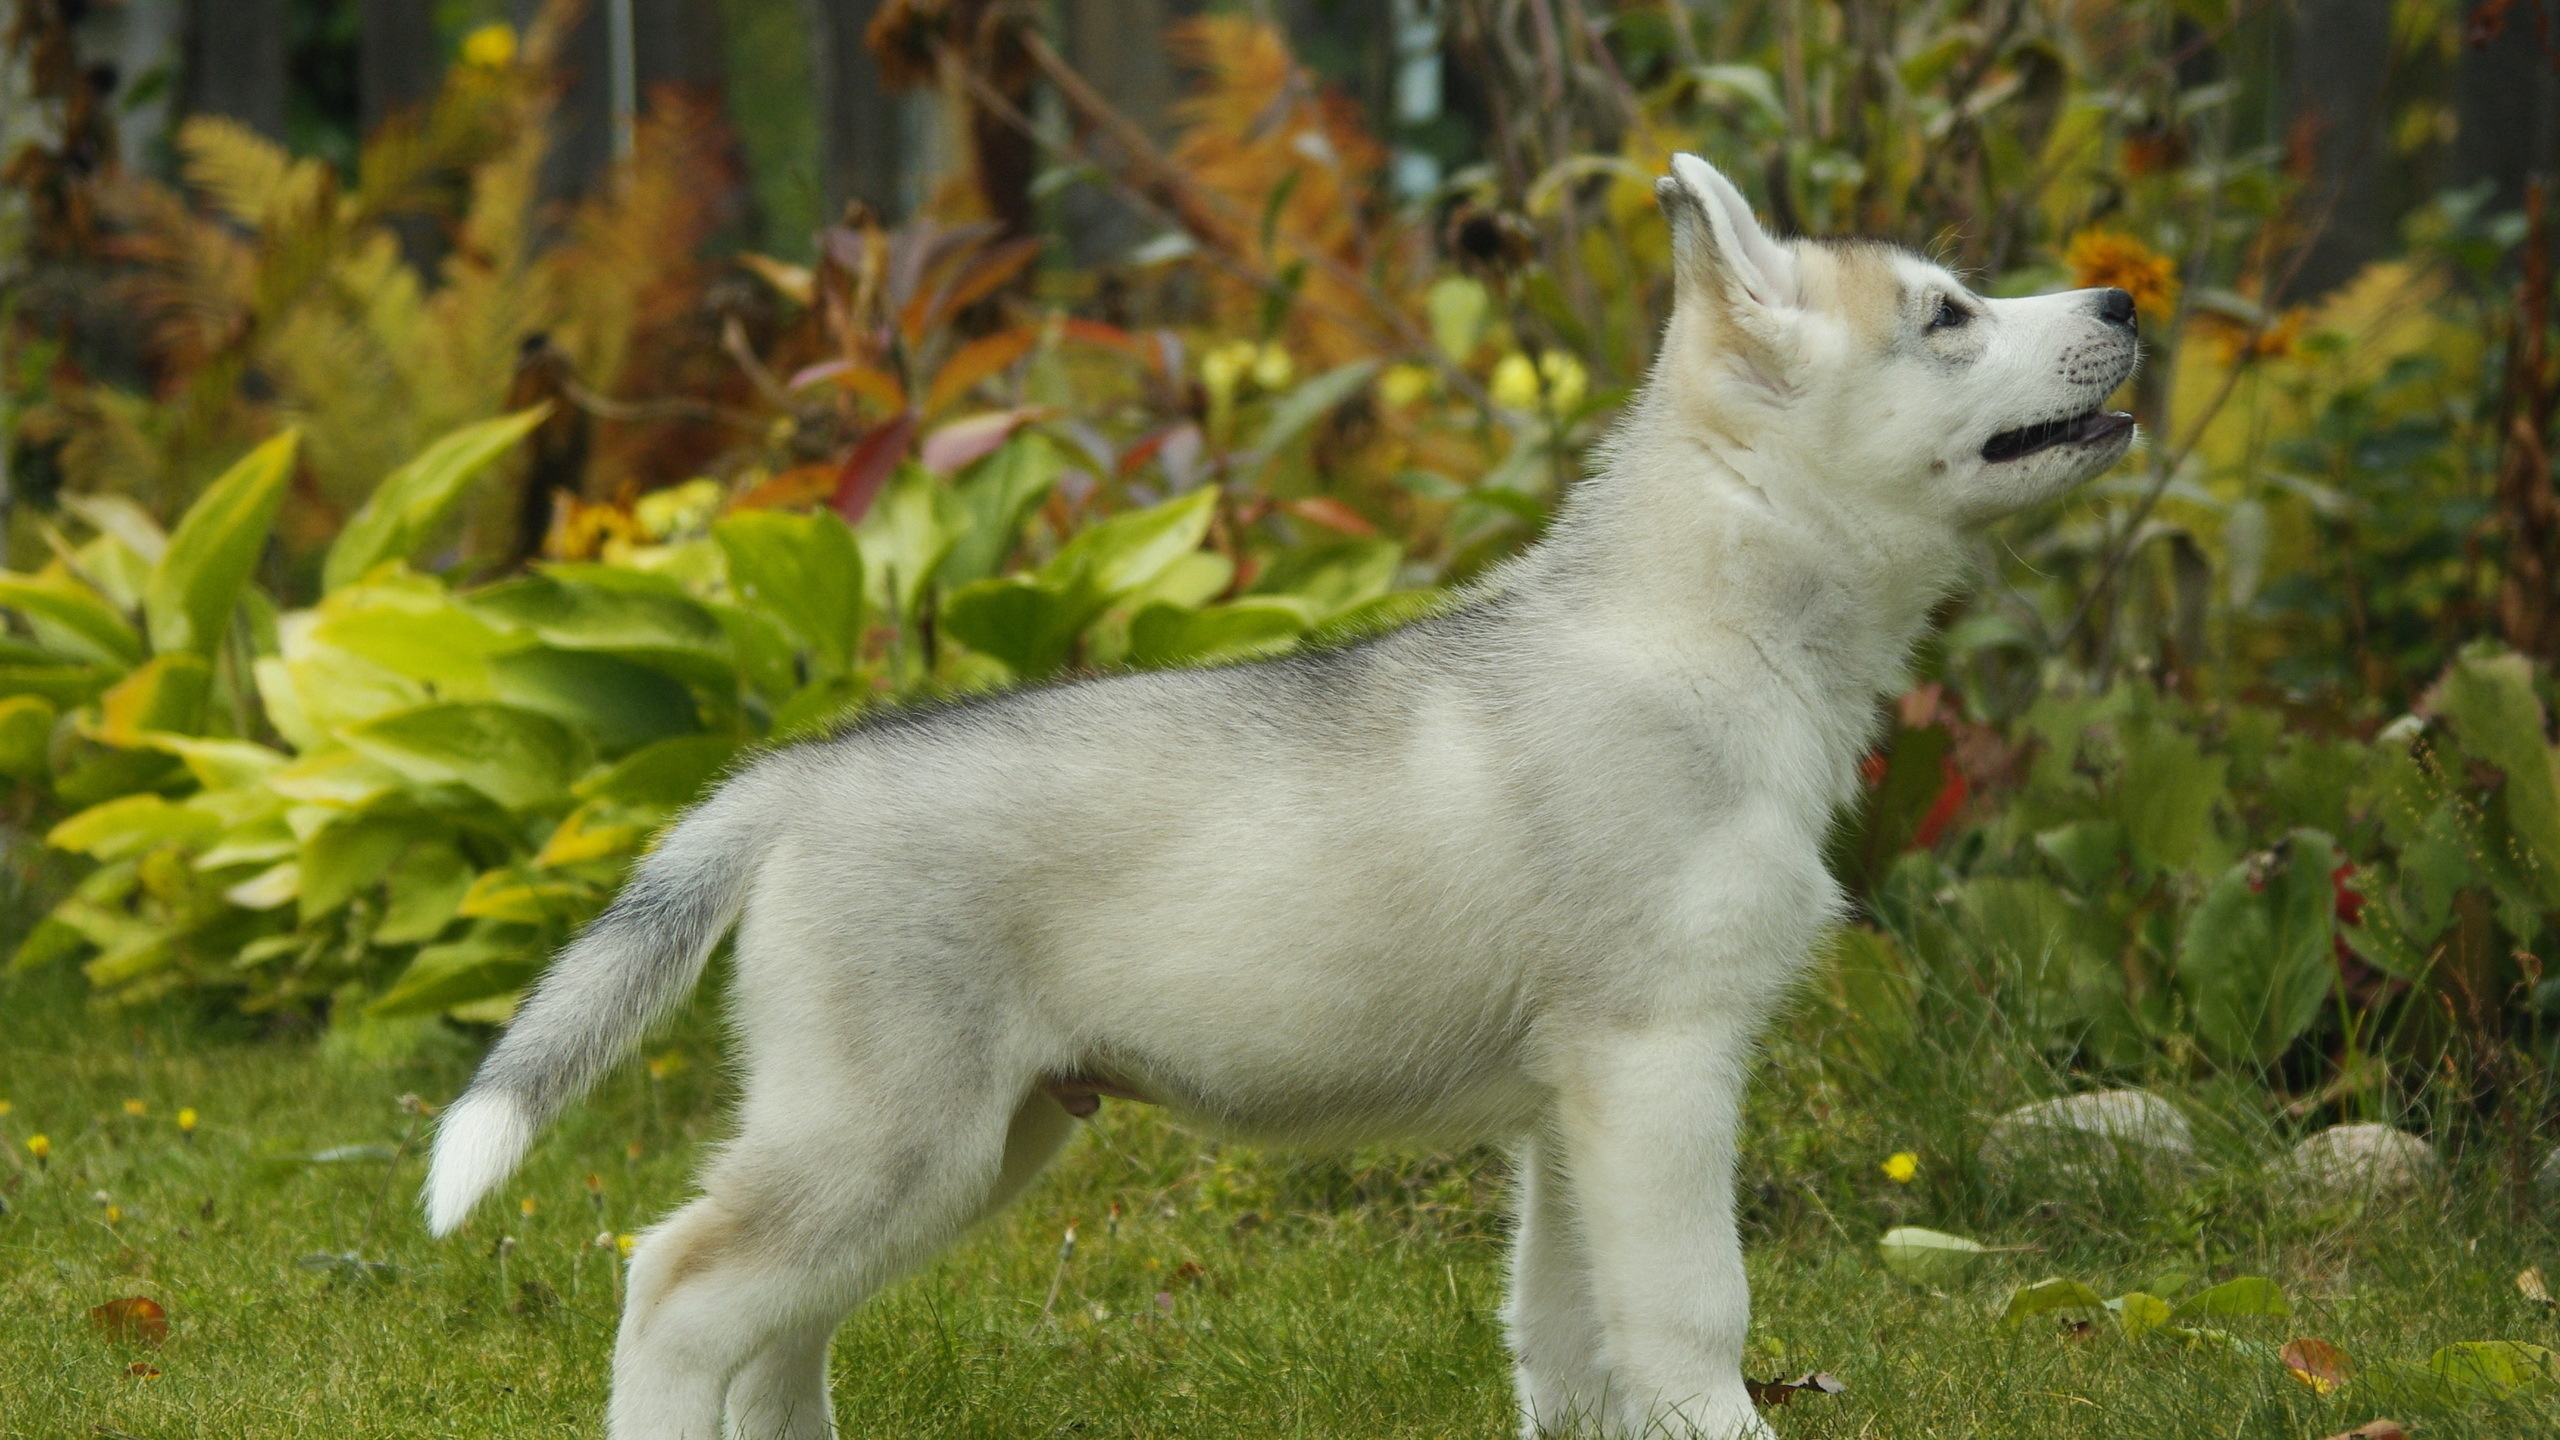 White Siberian Husky Puppy on Green Grass Field During Daytime. Wallpaper in 2560x1440 Resolution